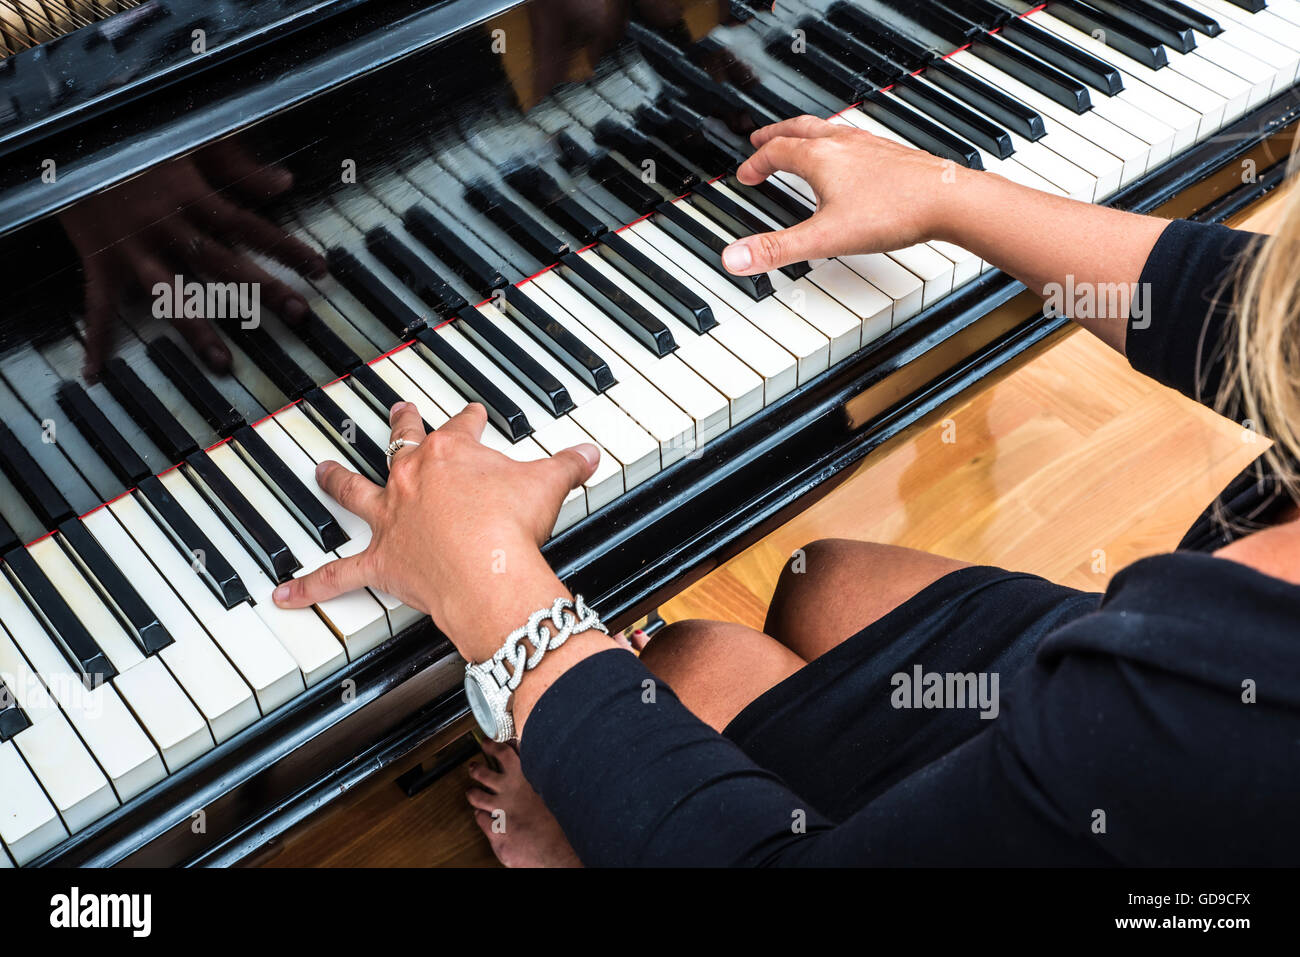 Hands of an elegant classical musician woman playing on piano. Stock Photo